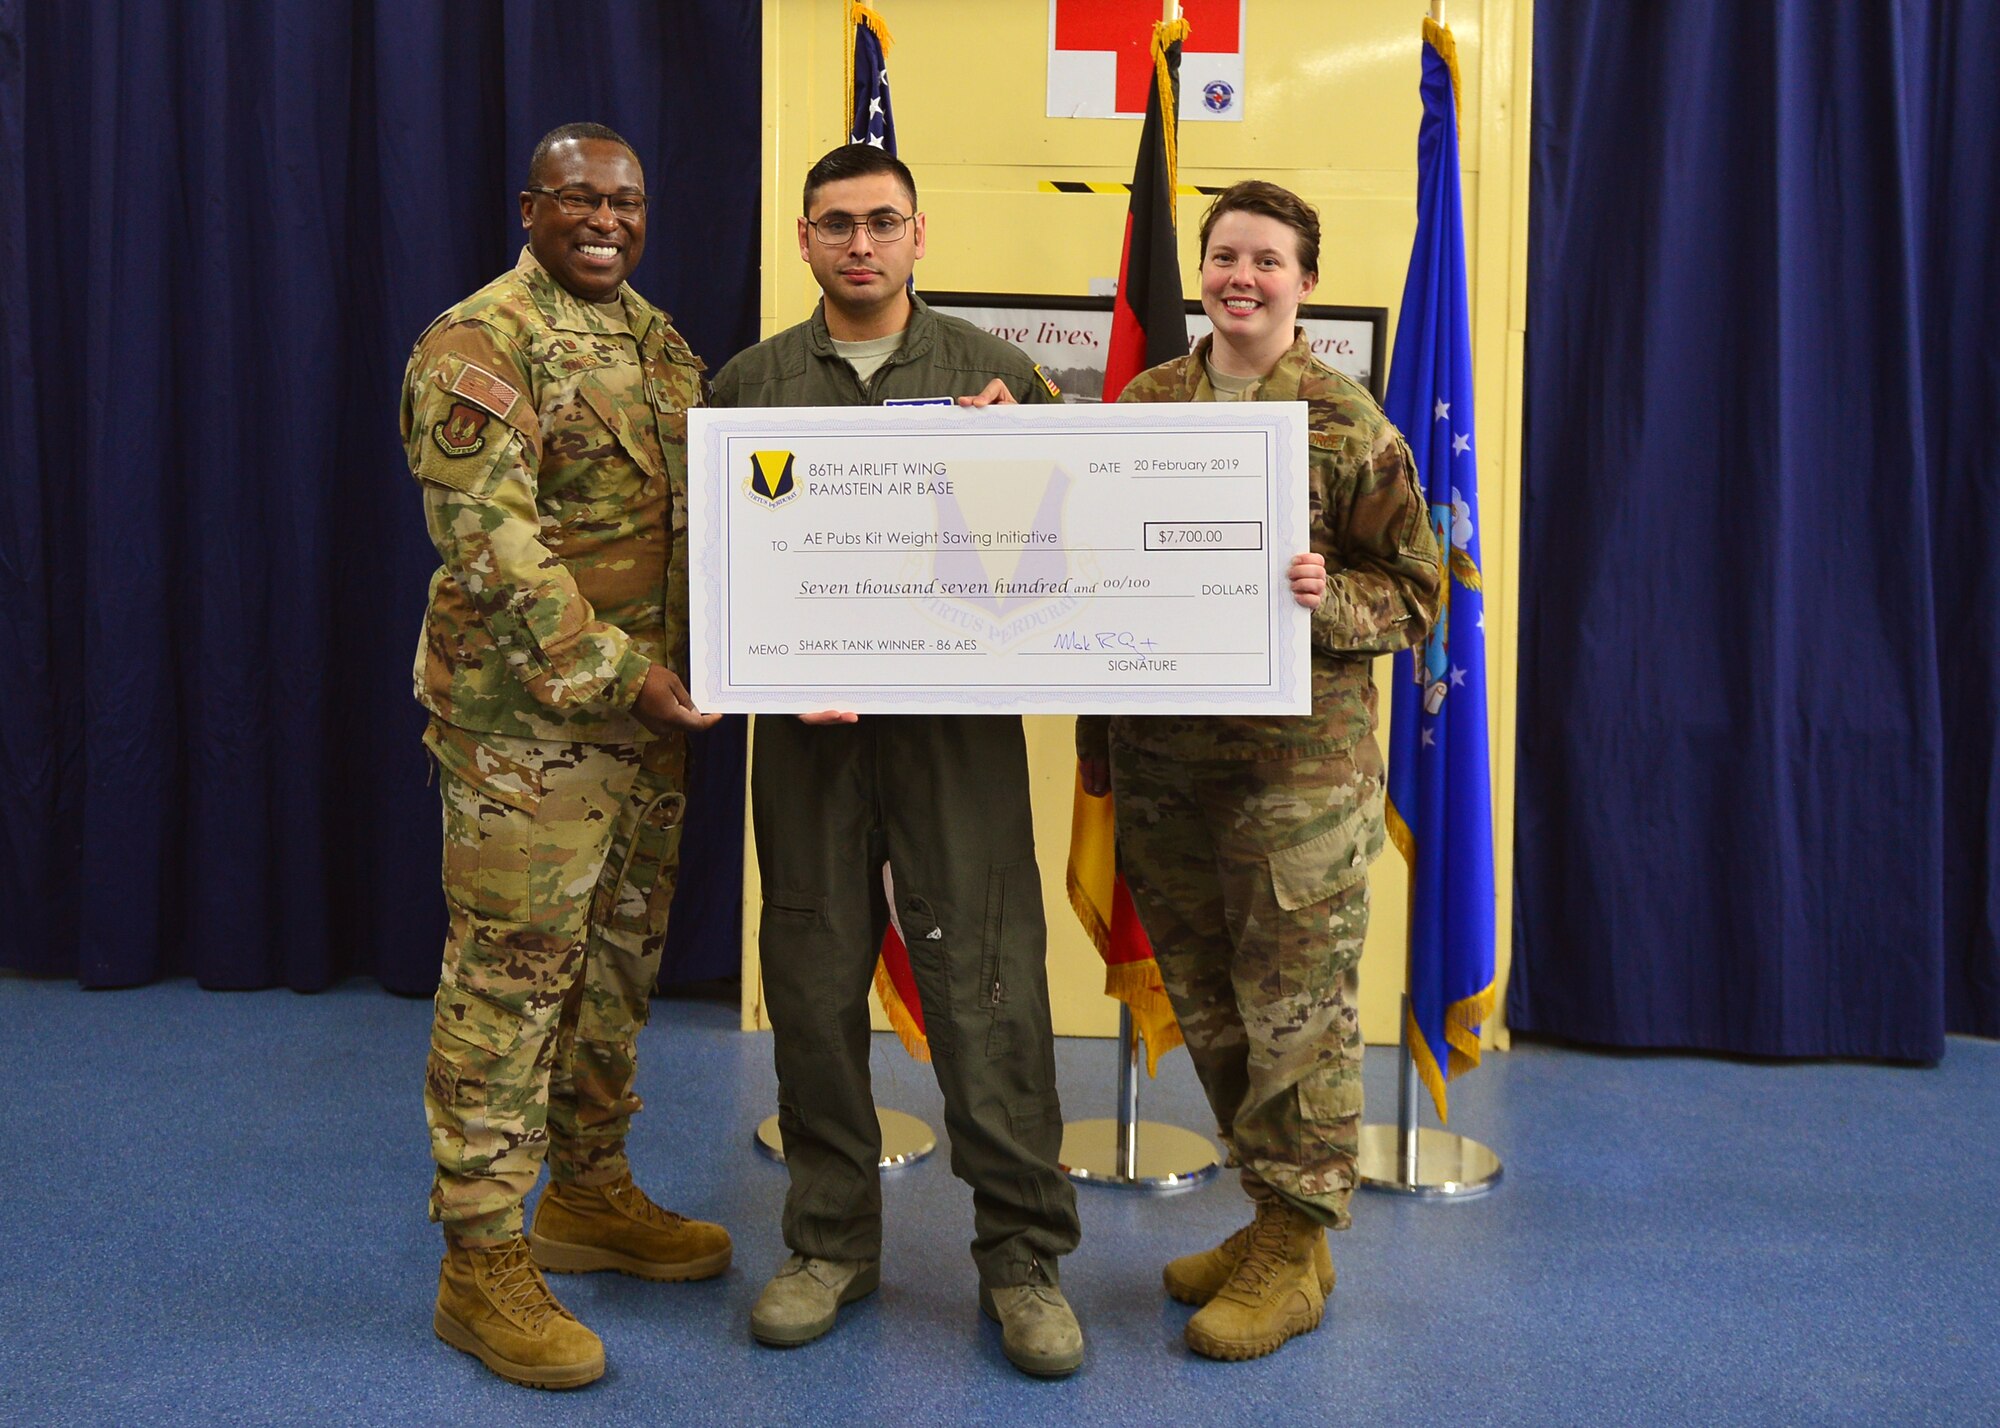 From left to right, U.S. Air Force Col. Ronald Jones, 86th Aeromedical Evacuation Squadron commander, Staff Sgt. Devon Bernal, 86th AES aeromedical evacuation technician, and Staff Sgt. Courtney Fitzpatrick, 86th AES logistician, show off a check awarded to their team at Ramstein Air Base, Germany, March 11, 2019.